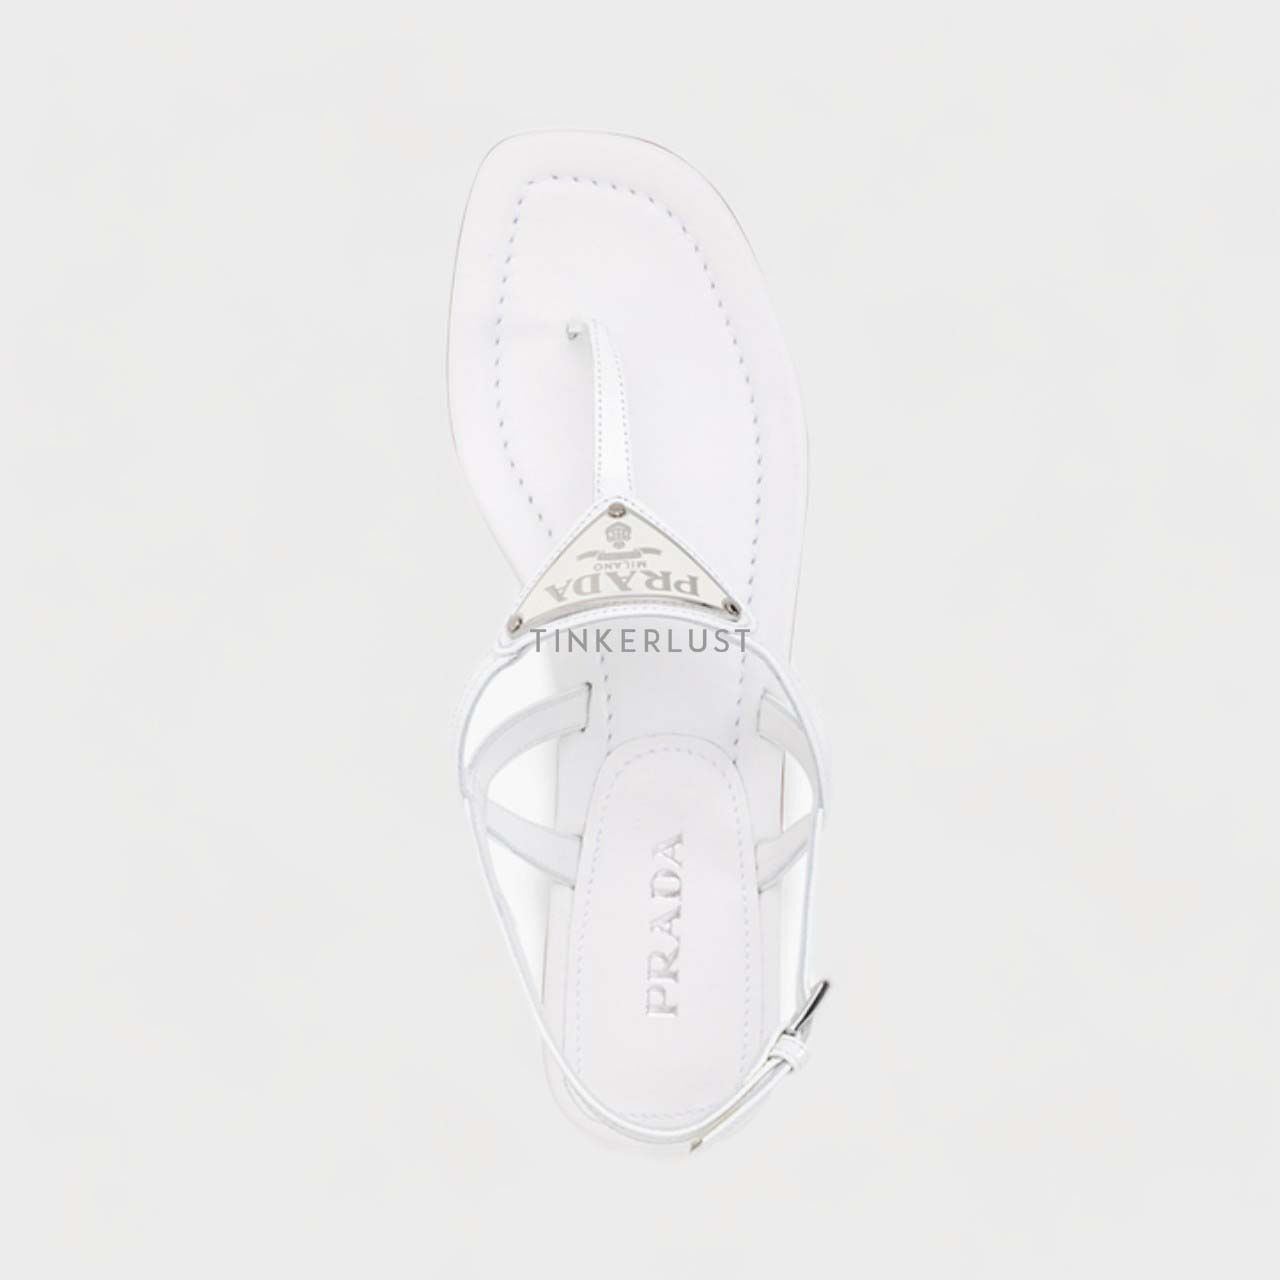 PRADA Thong Sandals in White Patent with Triangle Logo